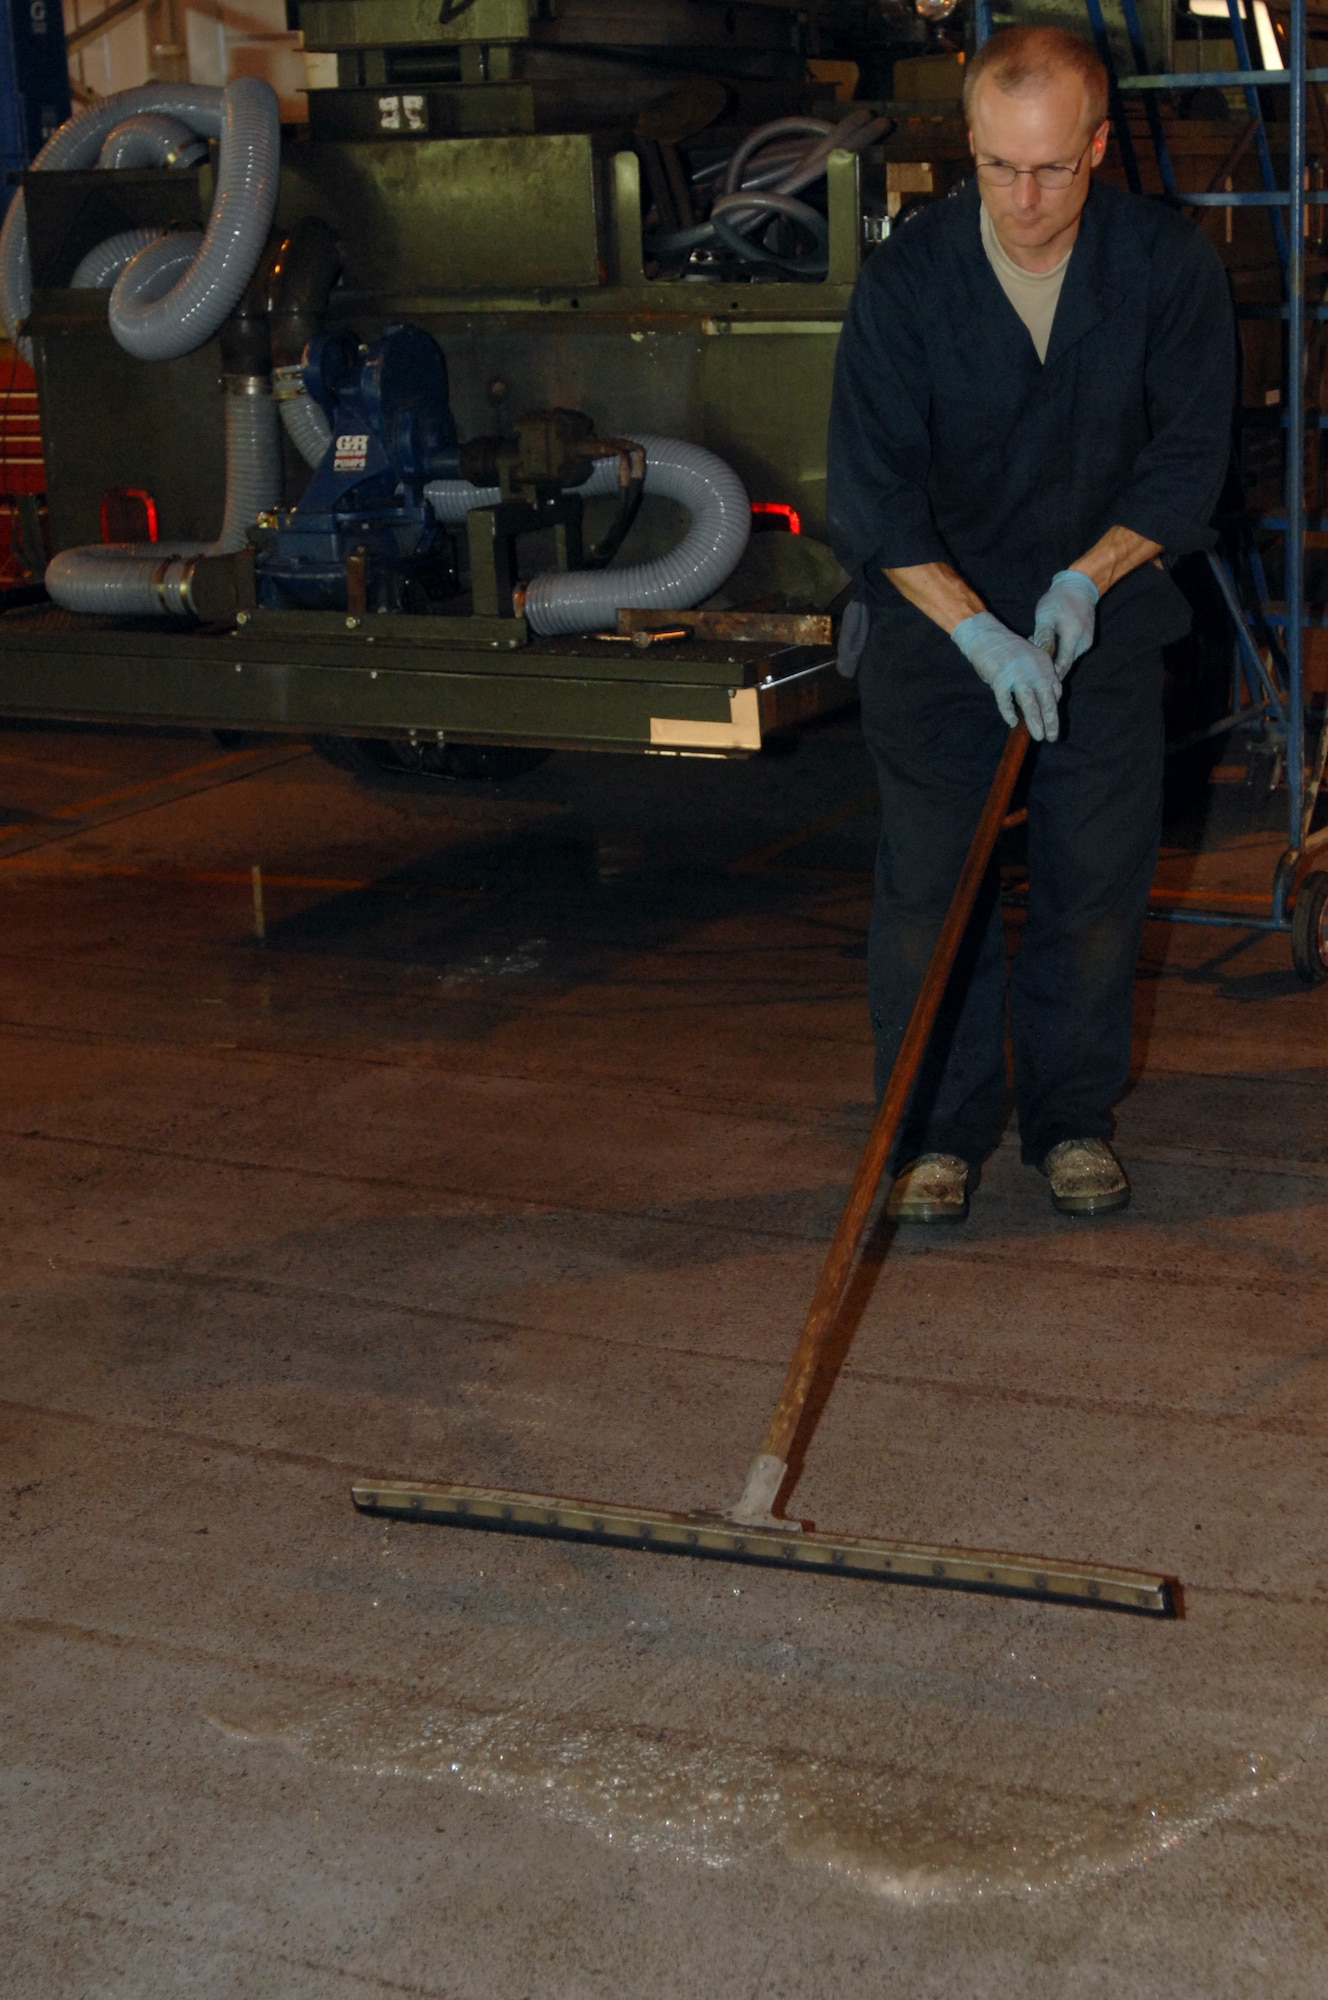 Tech. Sgt. Carl Vickes, 446th Logistic Readiness Flight, McChord Air Force Base, Wash., cleans excess water from the maintenance floor after conducting a leak test on a vehicle here July 25, 2008. (U.S. Air Force photo by Senior Airman Teresa M. Hawkins)